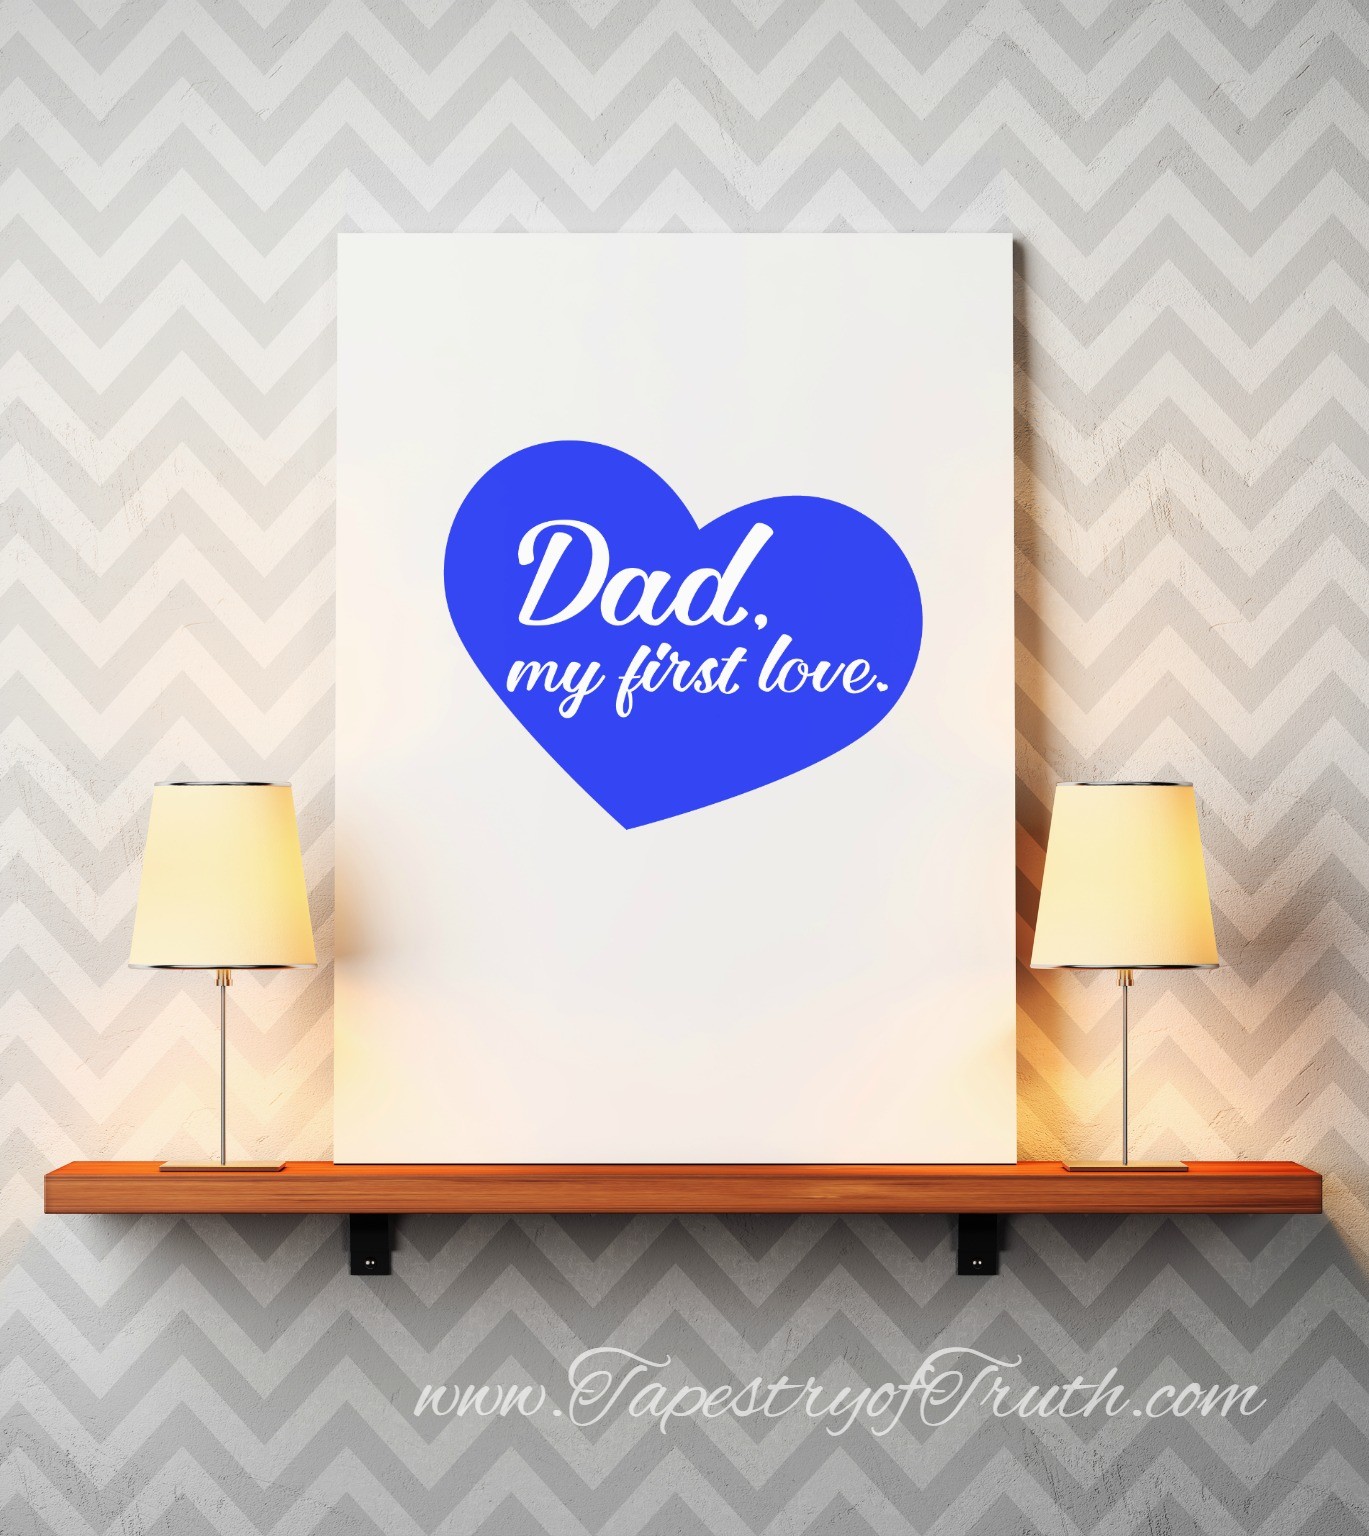 Dad, my first love [heart] - Decal 1